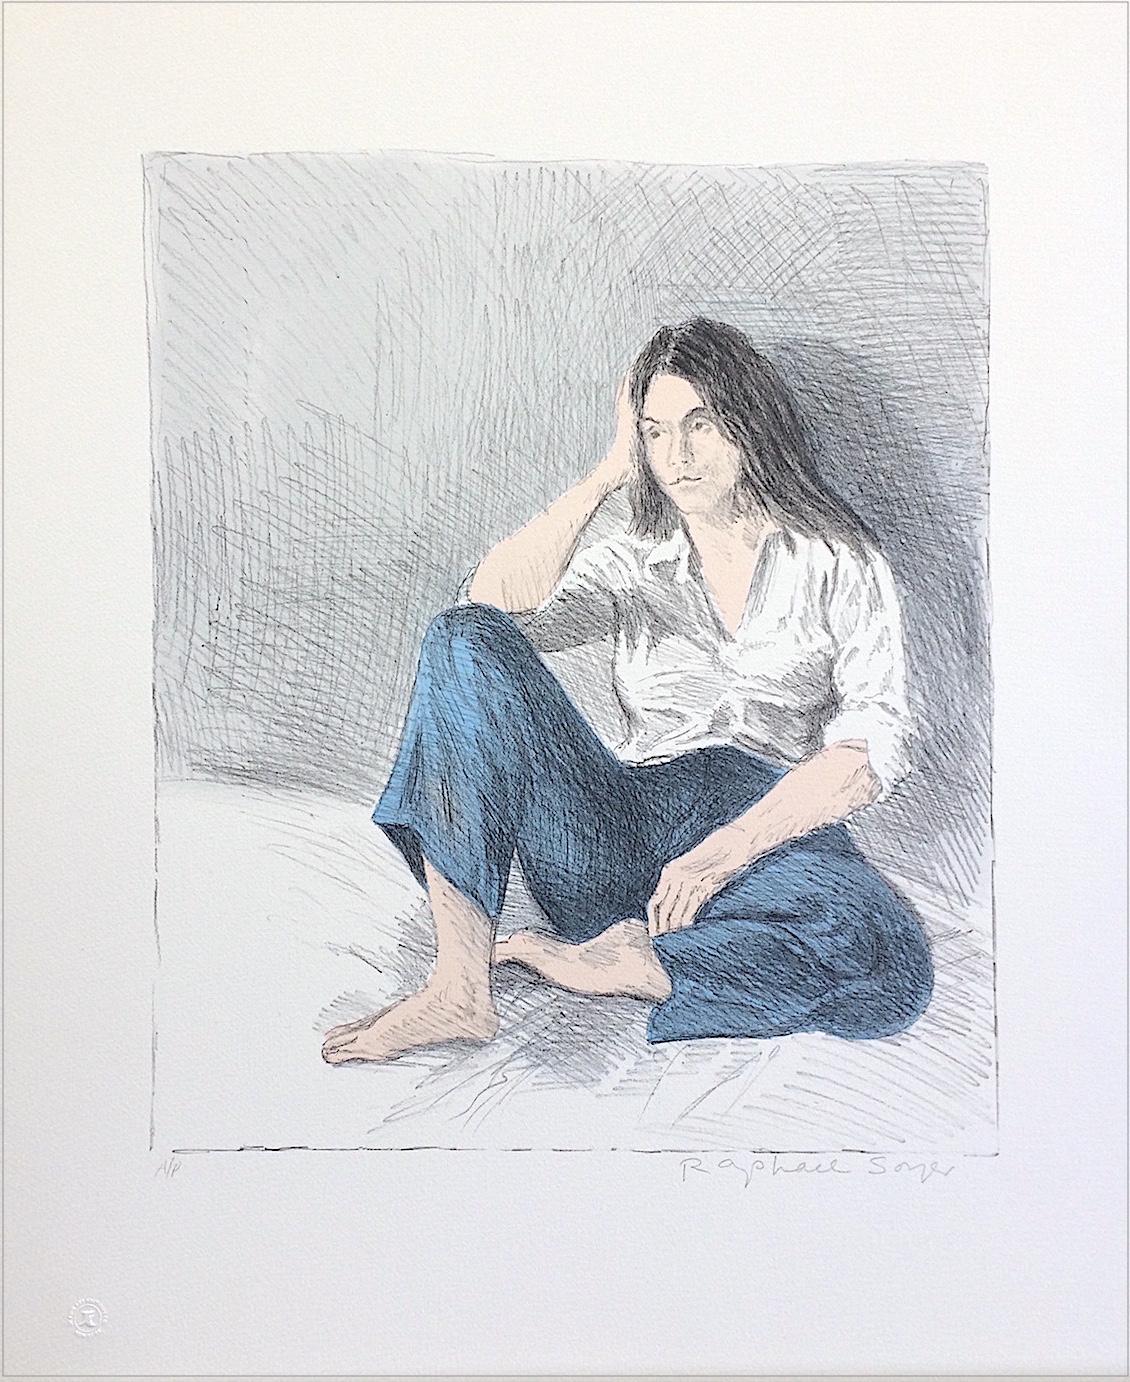 SEATED WOMAN BLUE JEANS Signed Lithograph Young Woman White Shirt Long Dark Hair - Print by Raphael Soyer